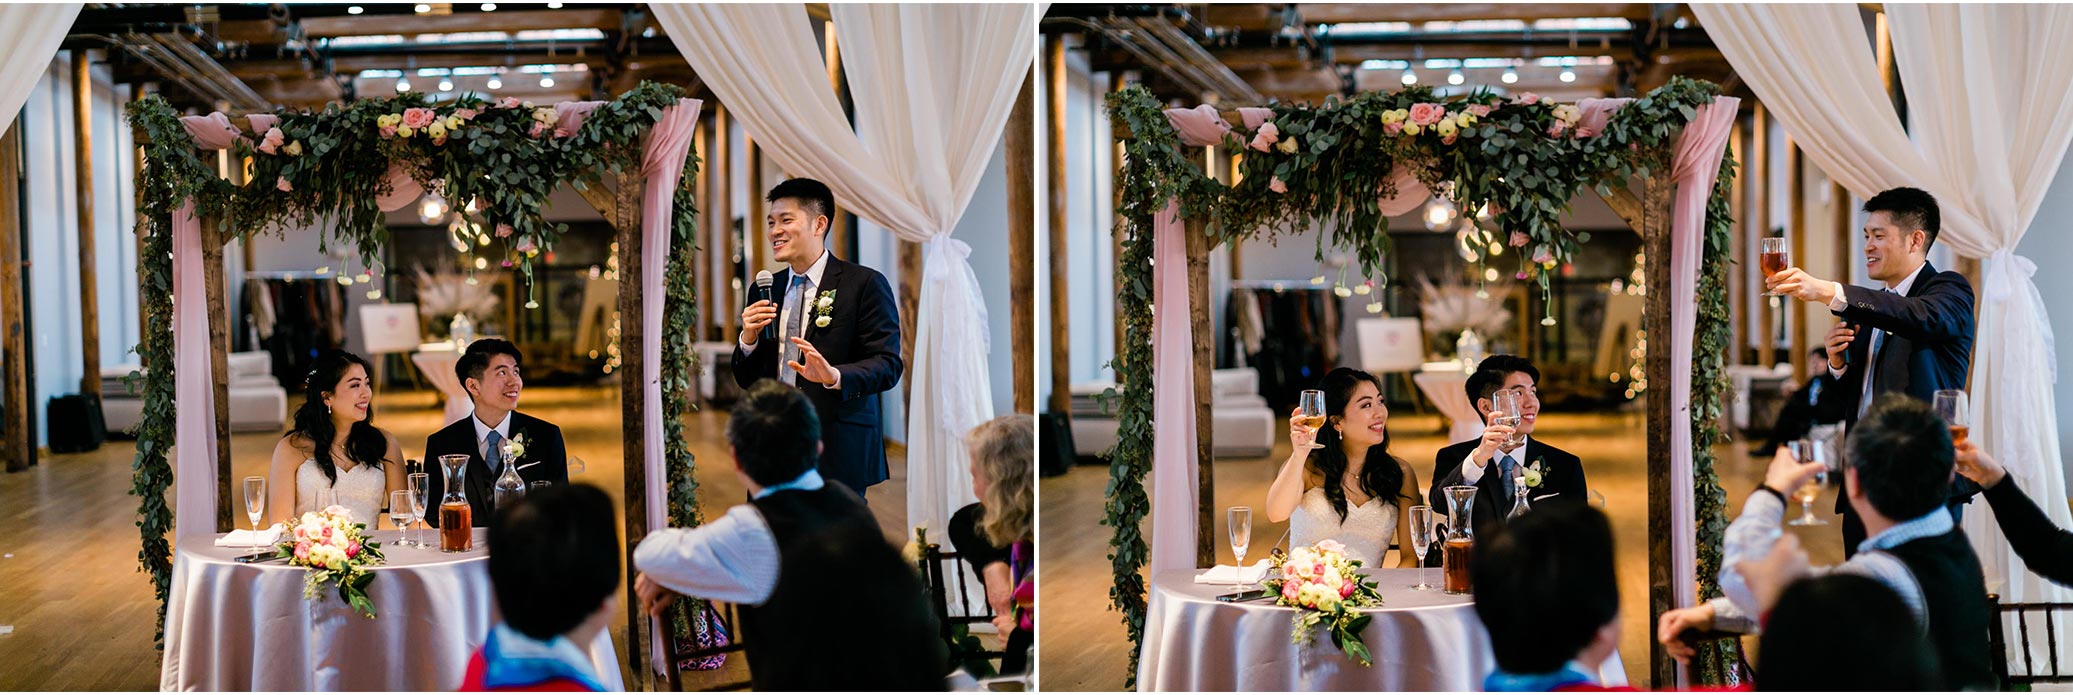 Best Man giving speech during reception | Durham Wedding Photographer | The Cotton Room | By G. Lin Photography